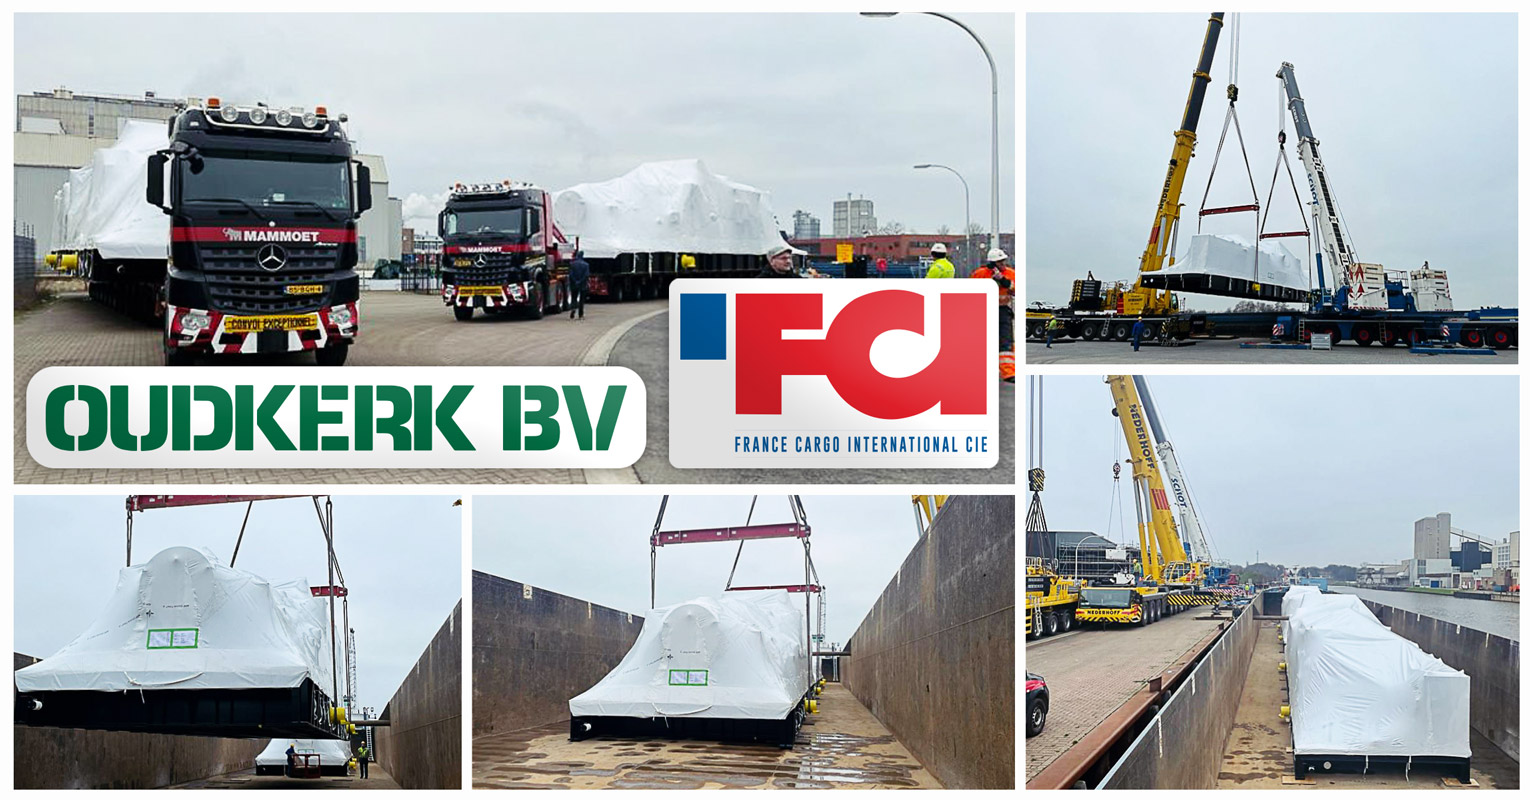 France Cargo International (FCI) Handled 2 x Compressors in Coordination with Oudkerk